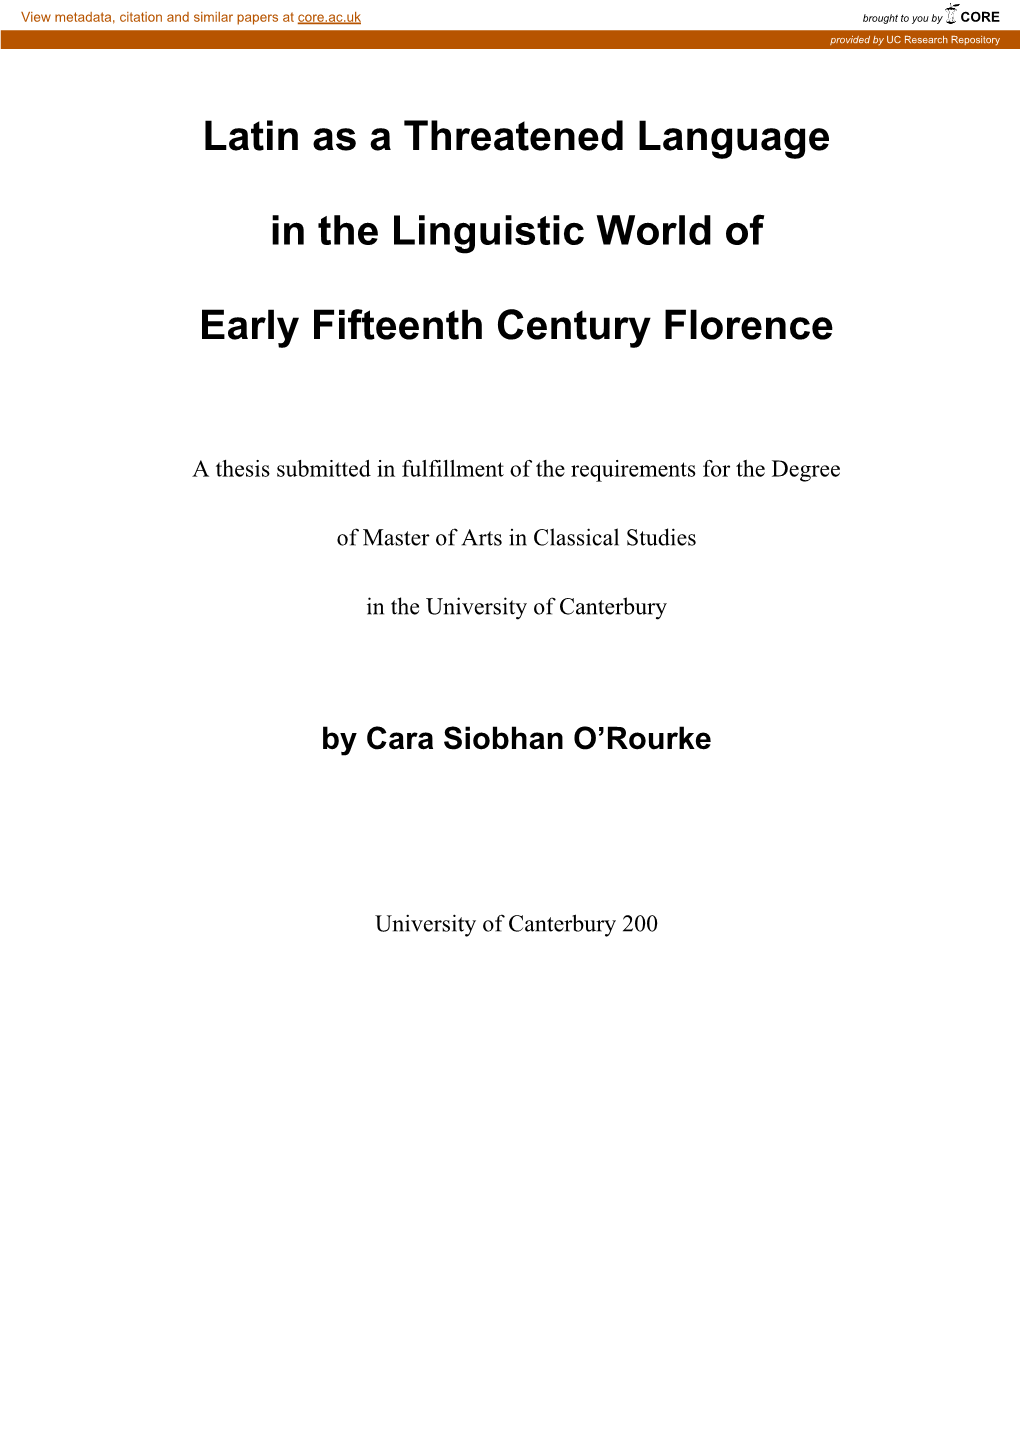 Latin As a Threatened Language in the Linguistic World of Early